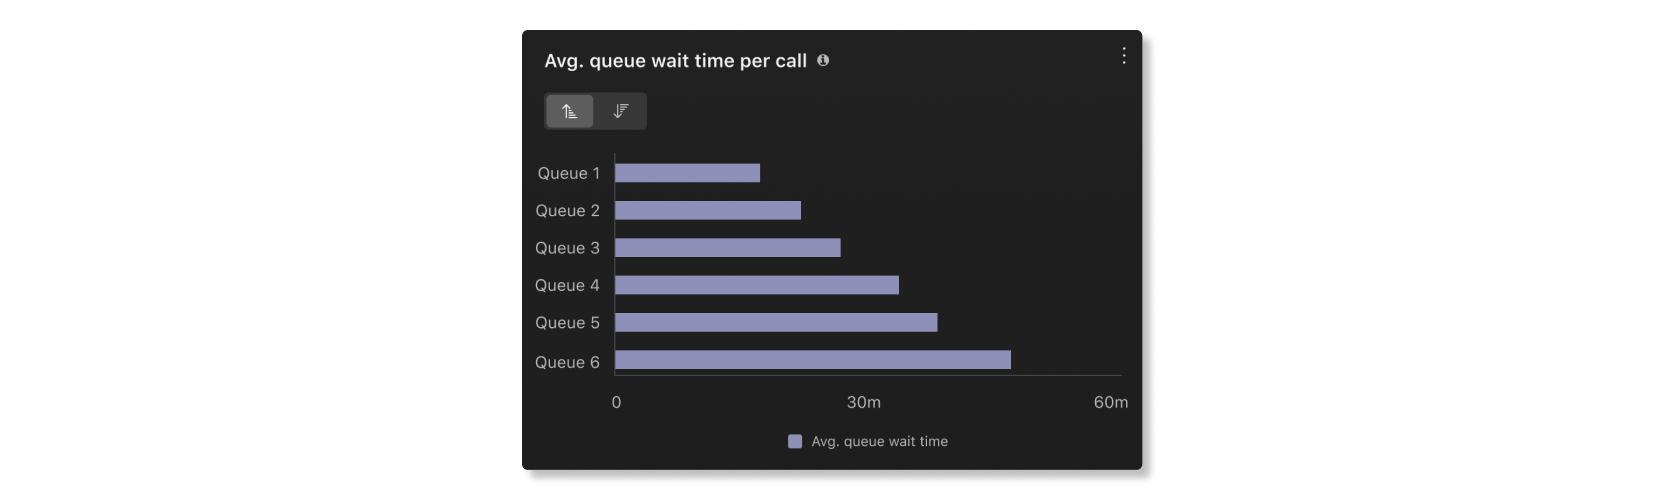 Avg. queue wait time per call chart in Supervisor desktop section of Customer Essentials analytics